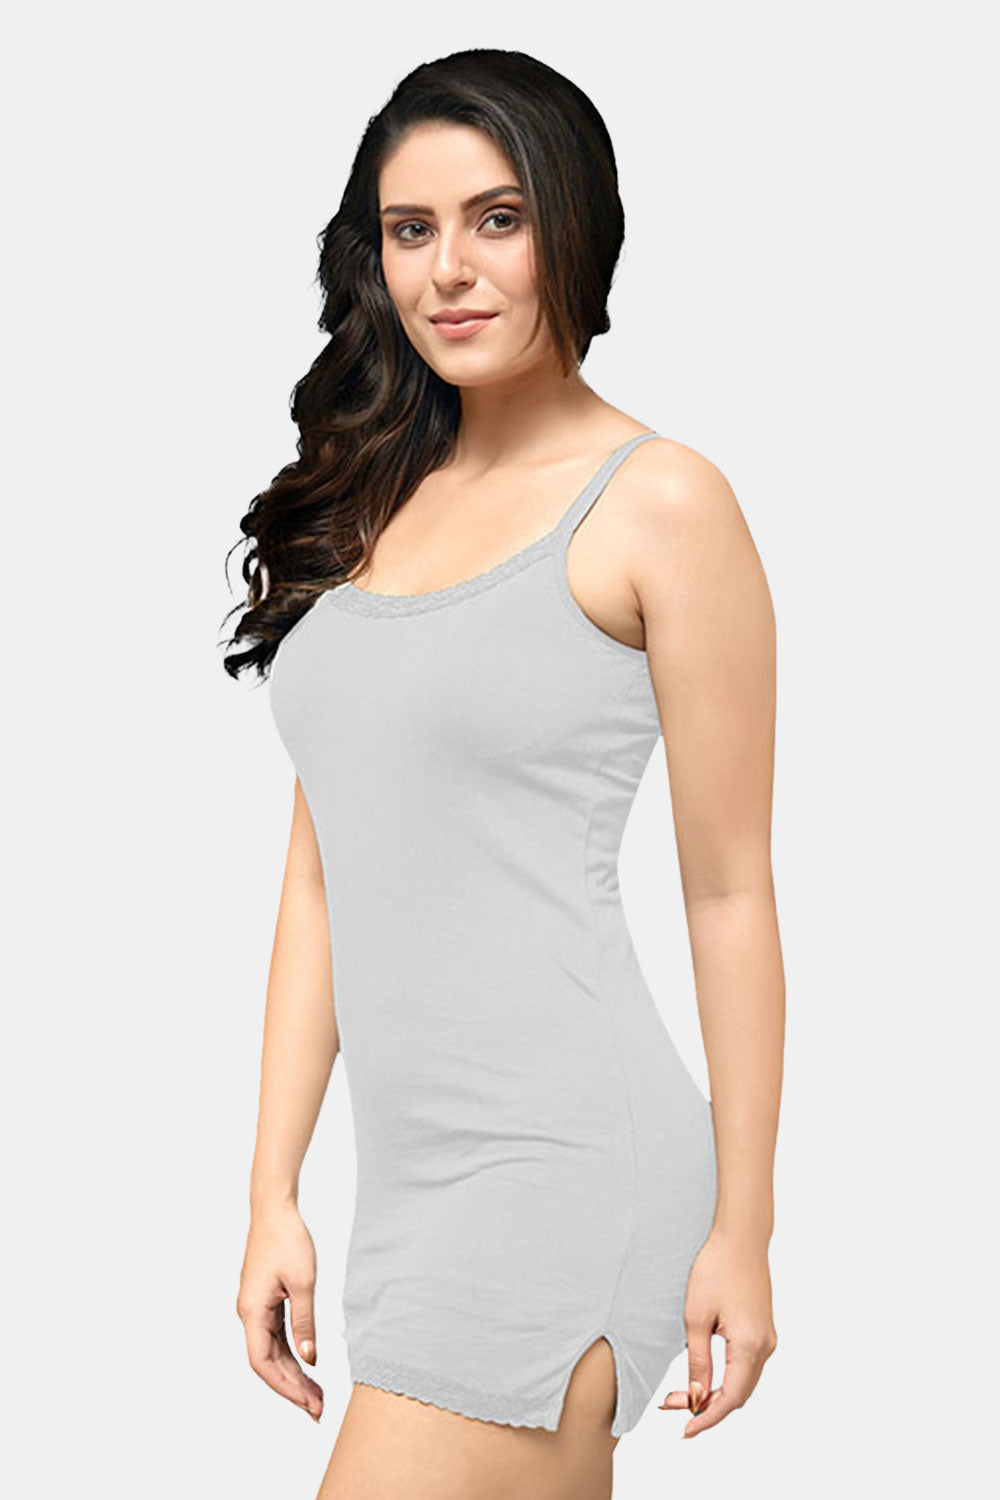 Women's Camisoles & Slips Online: Low Price Offer on Camisoles